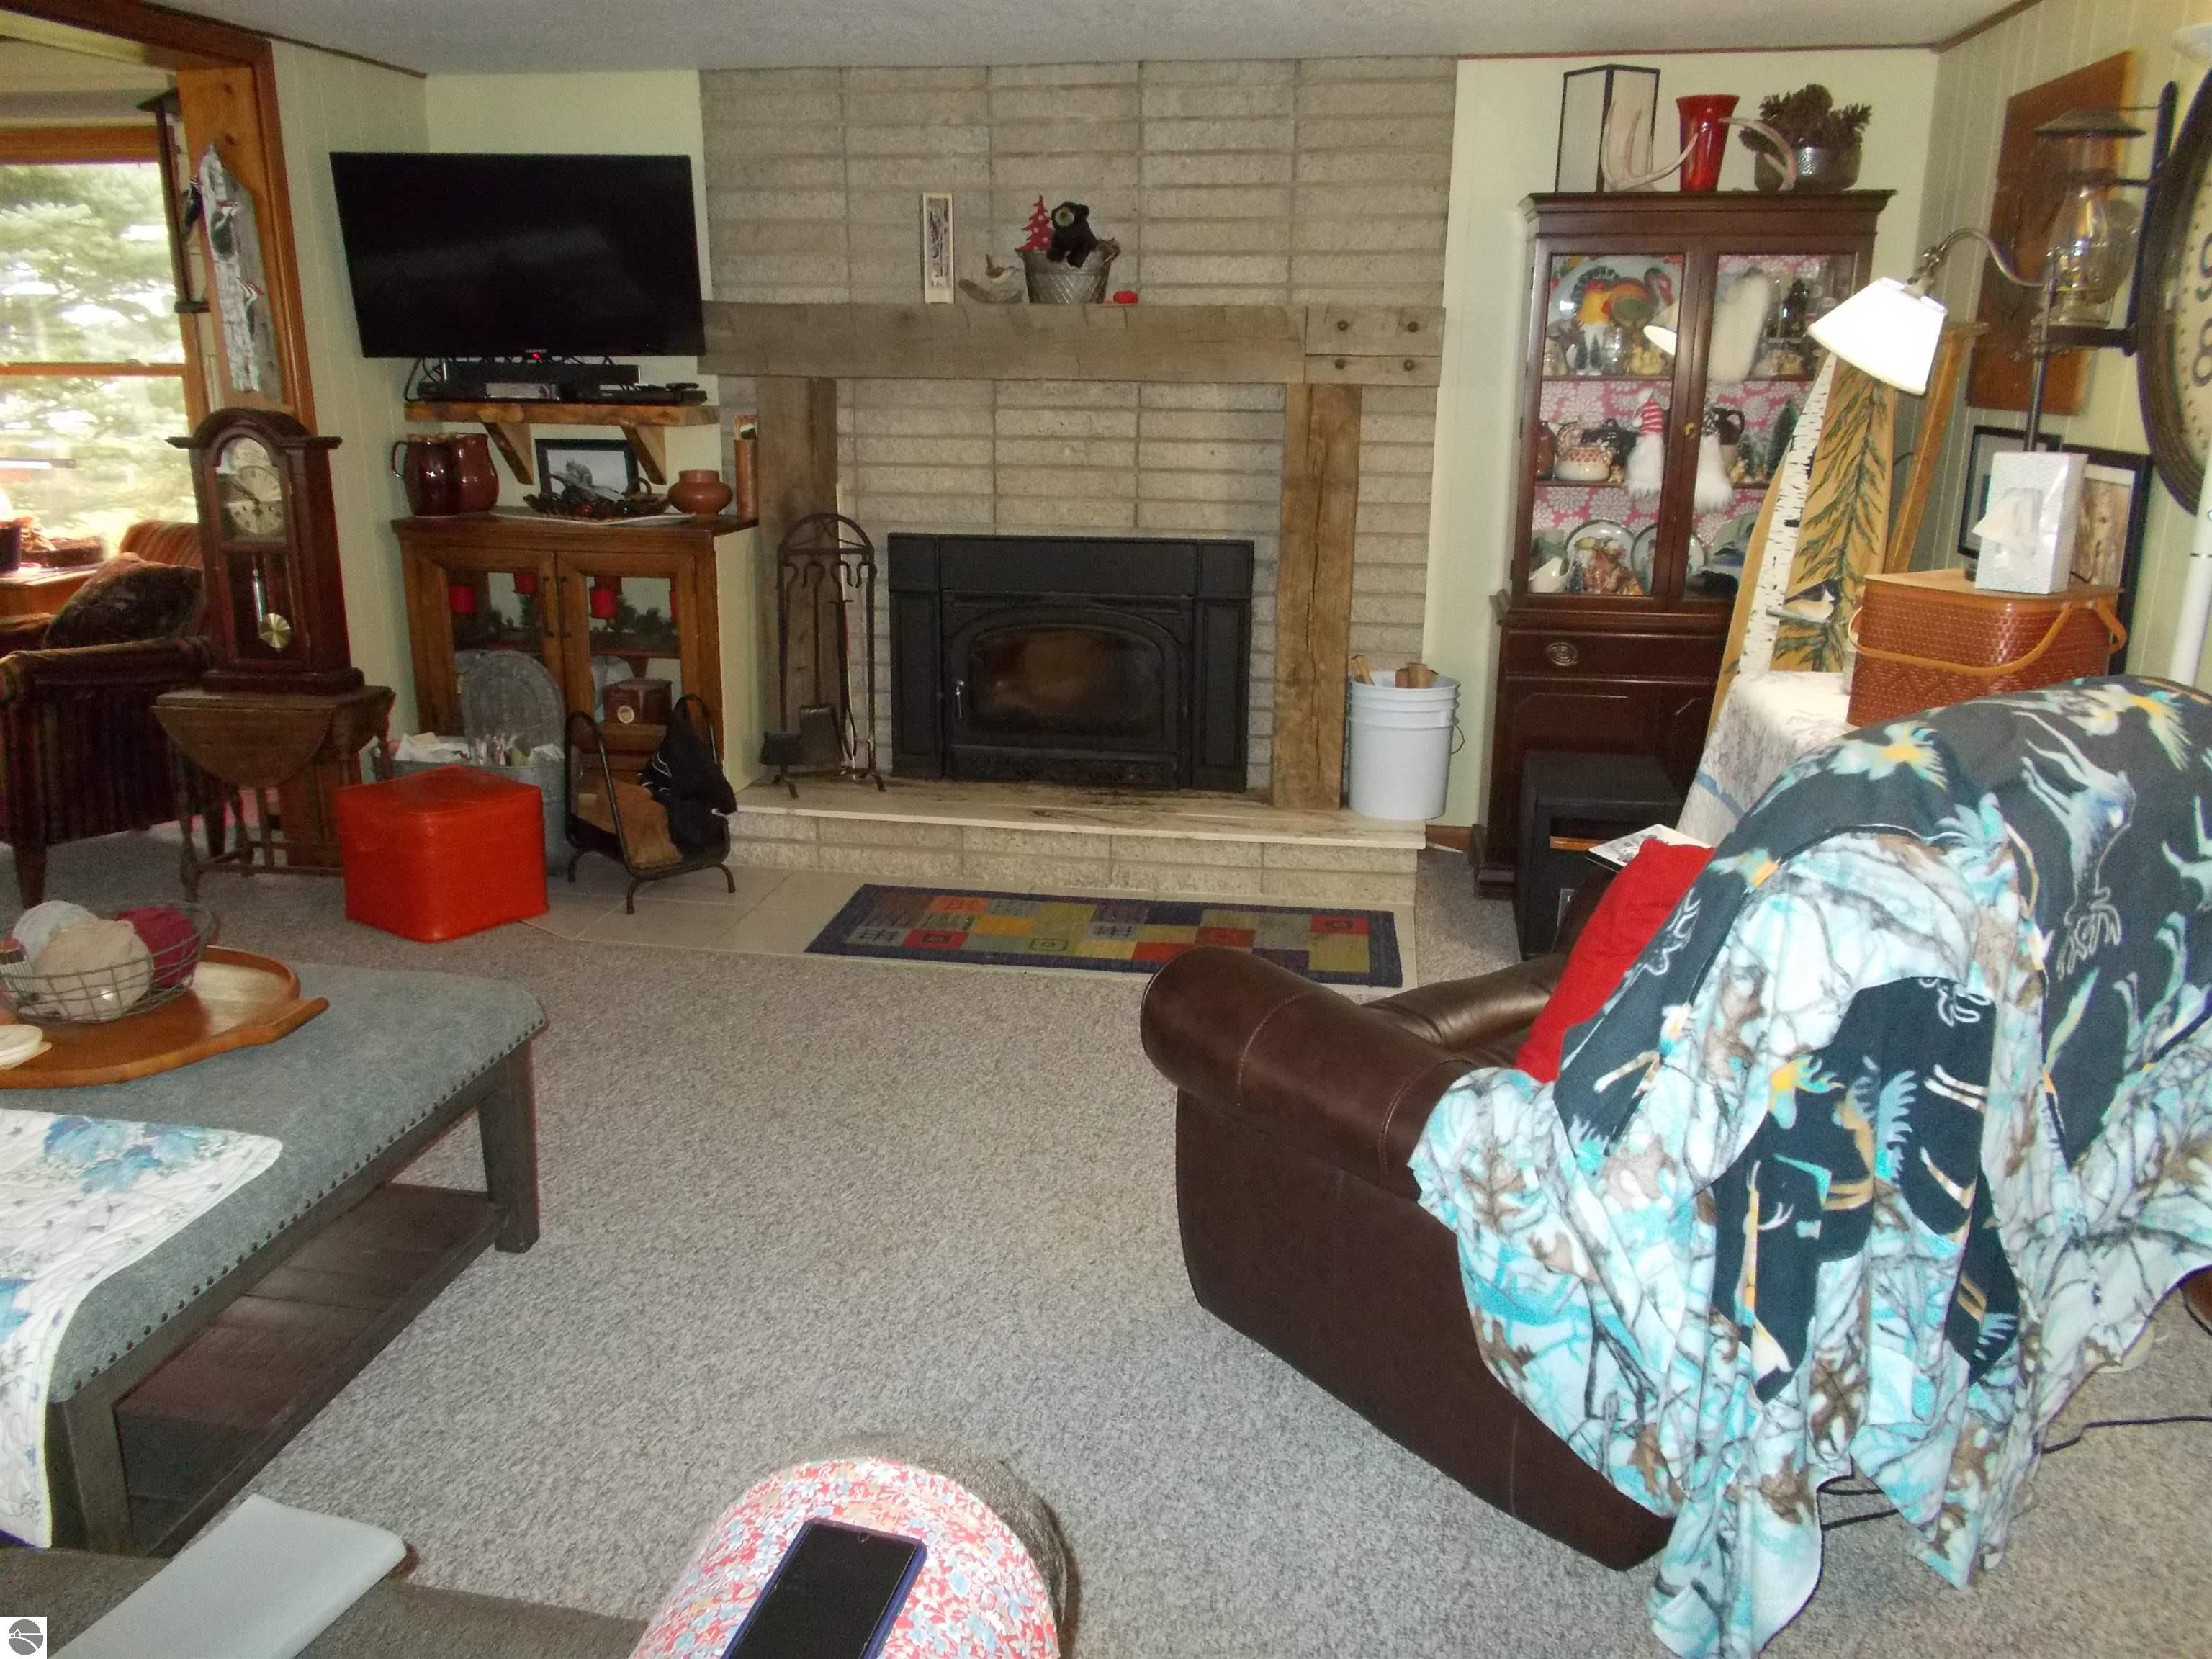 8485 Lakeview, Hale, MI 48739 photo 15 of 52